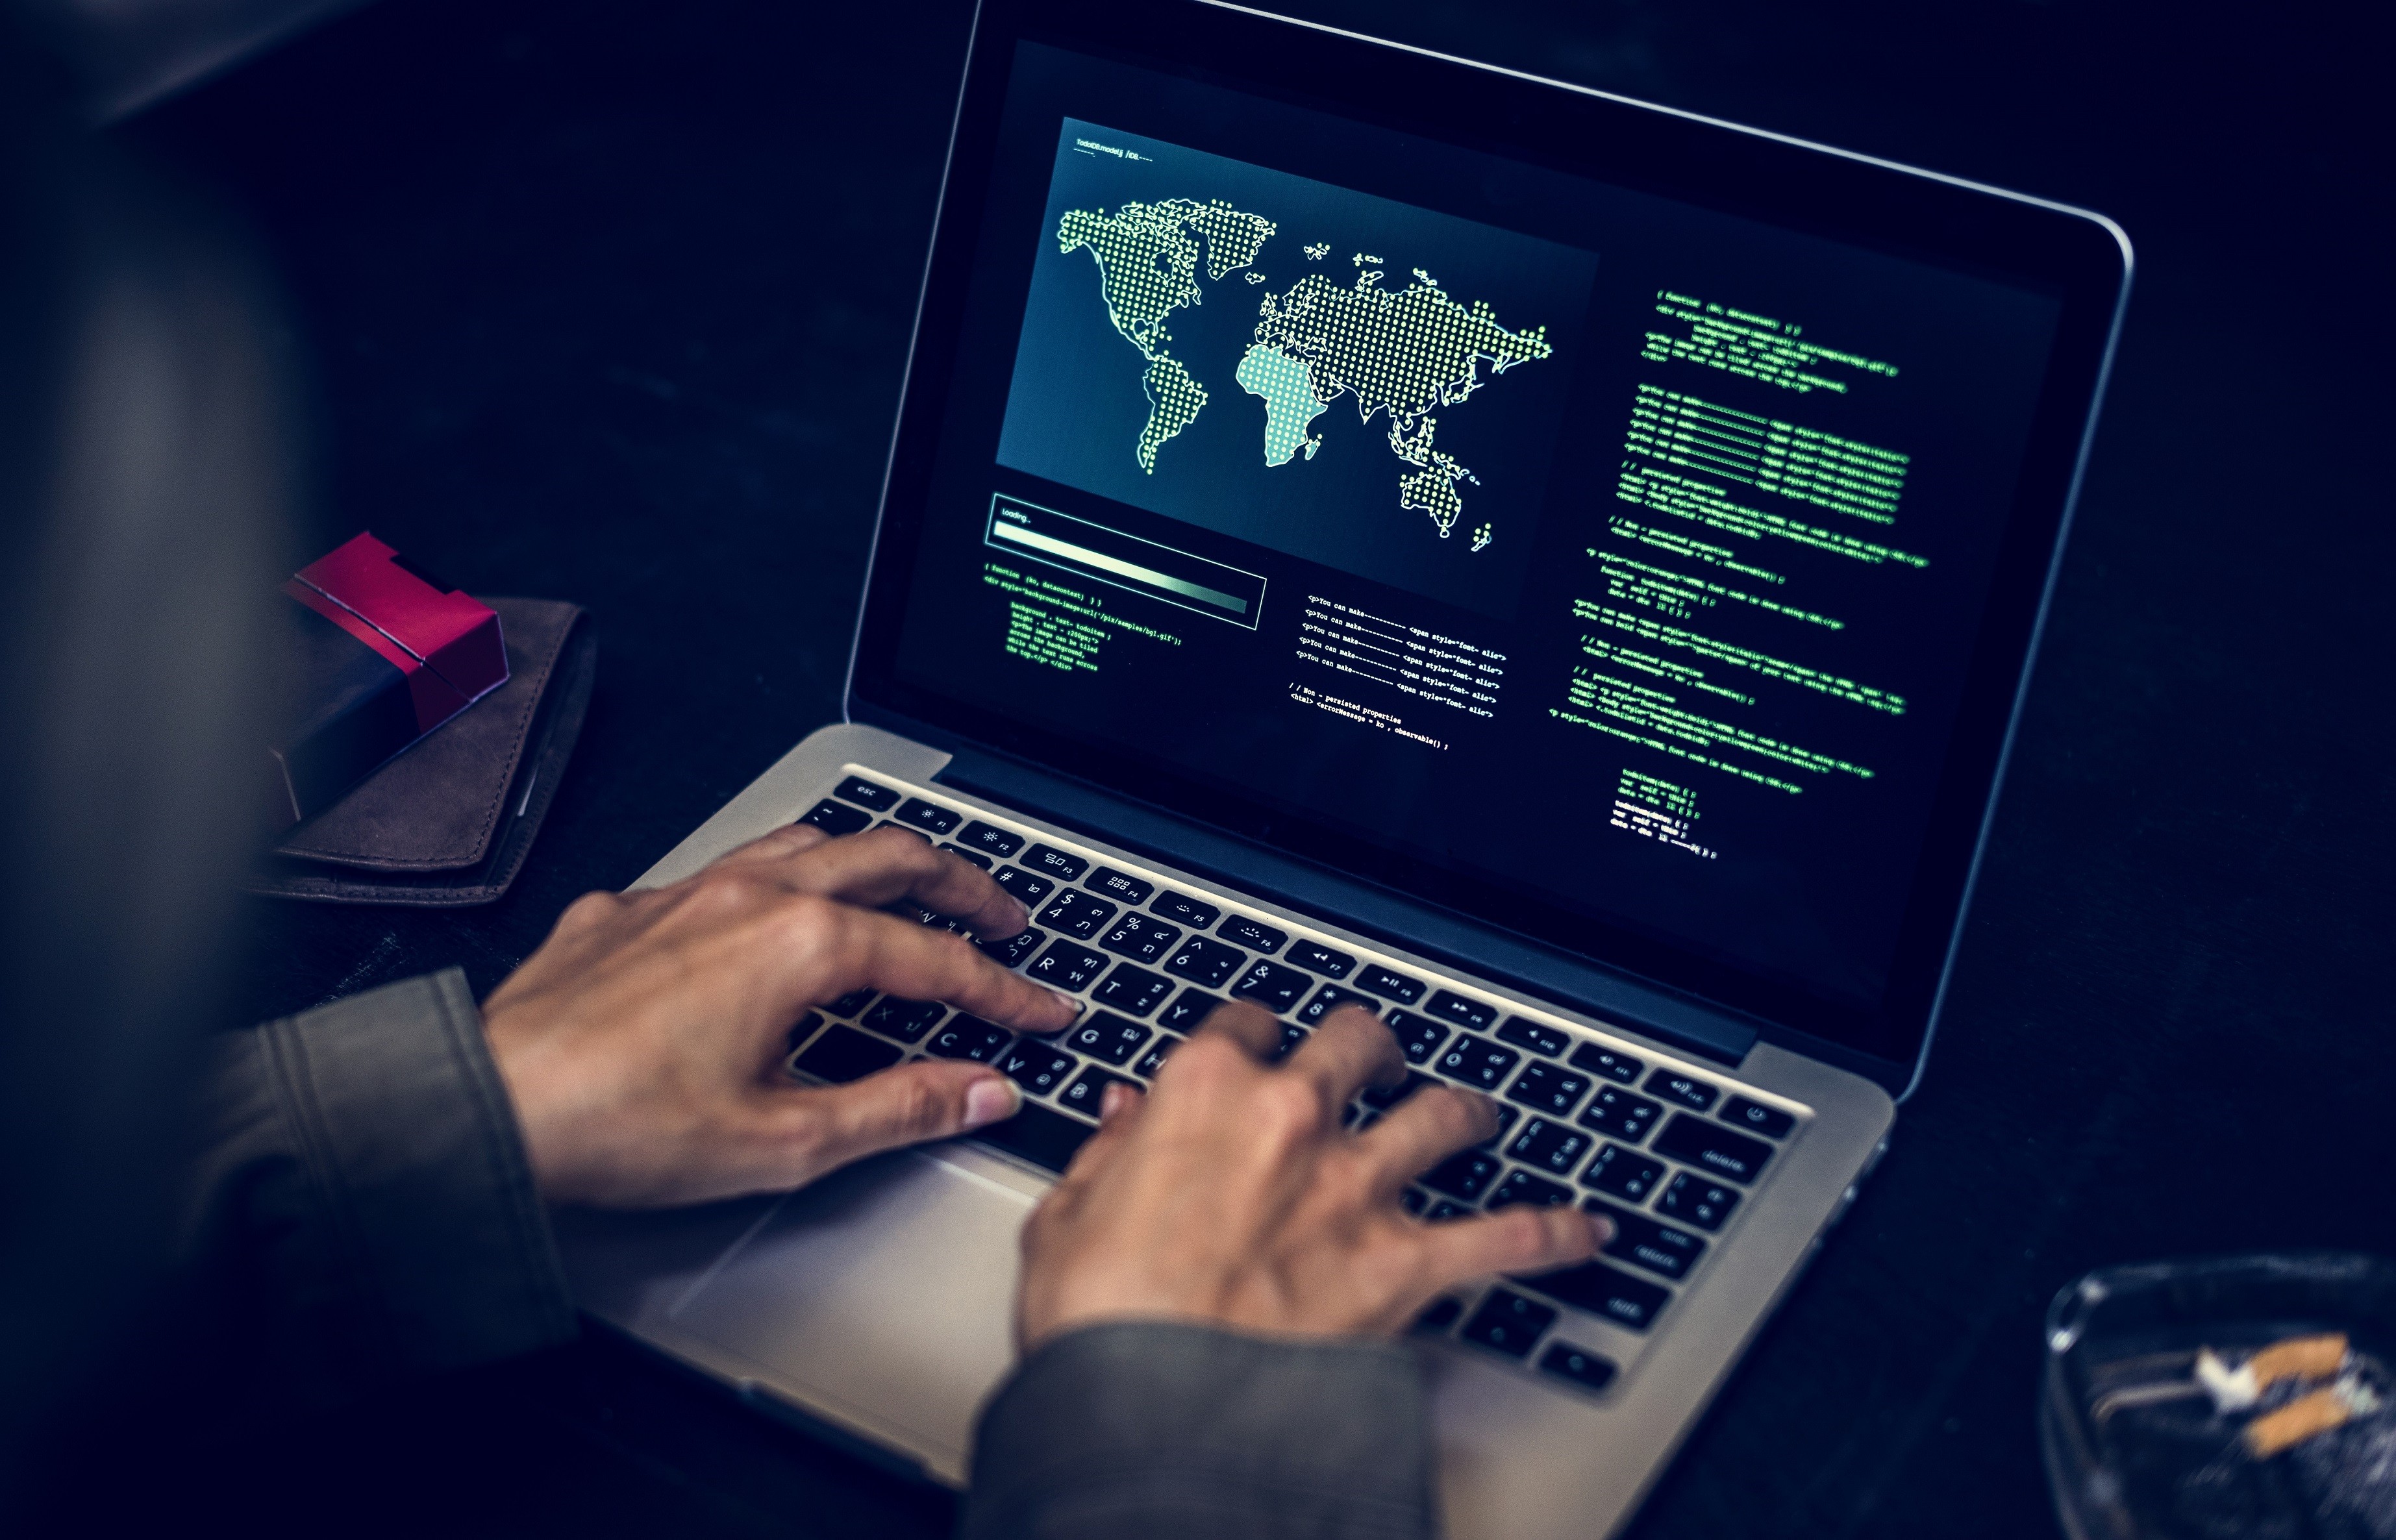 3 Different Cyberattacks and How To Prevent Them